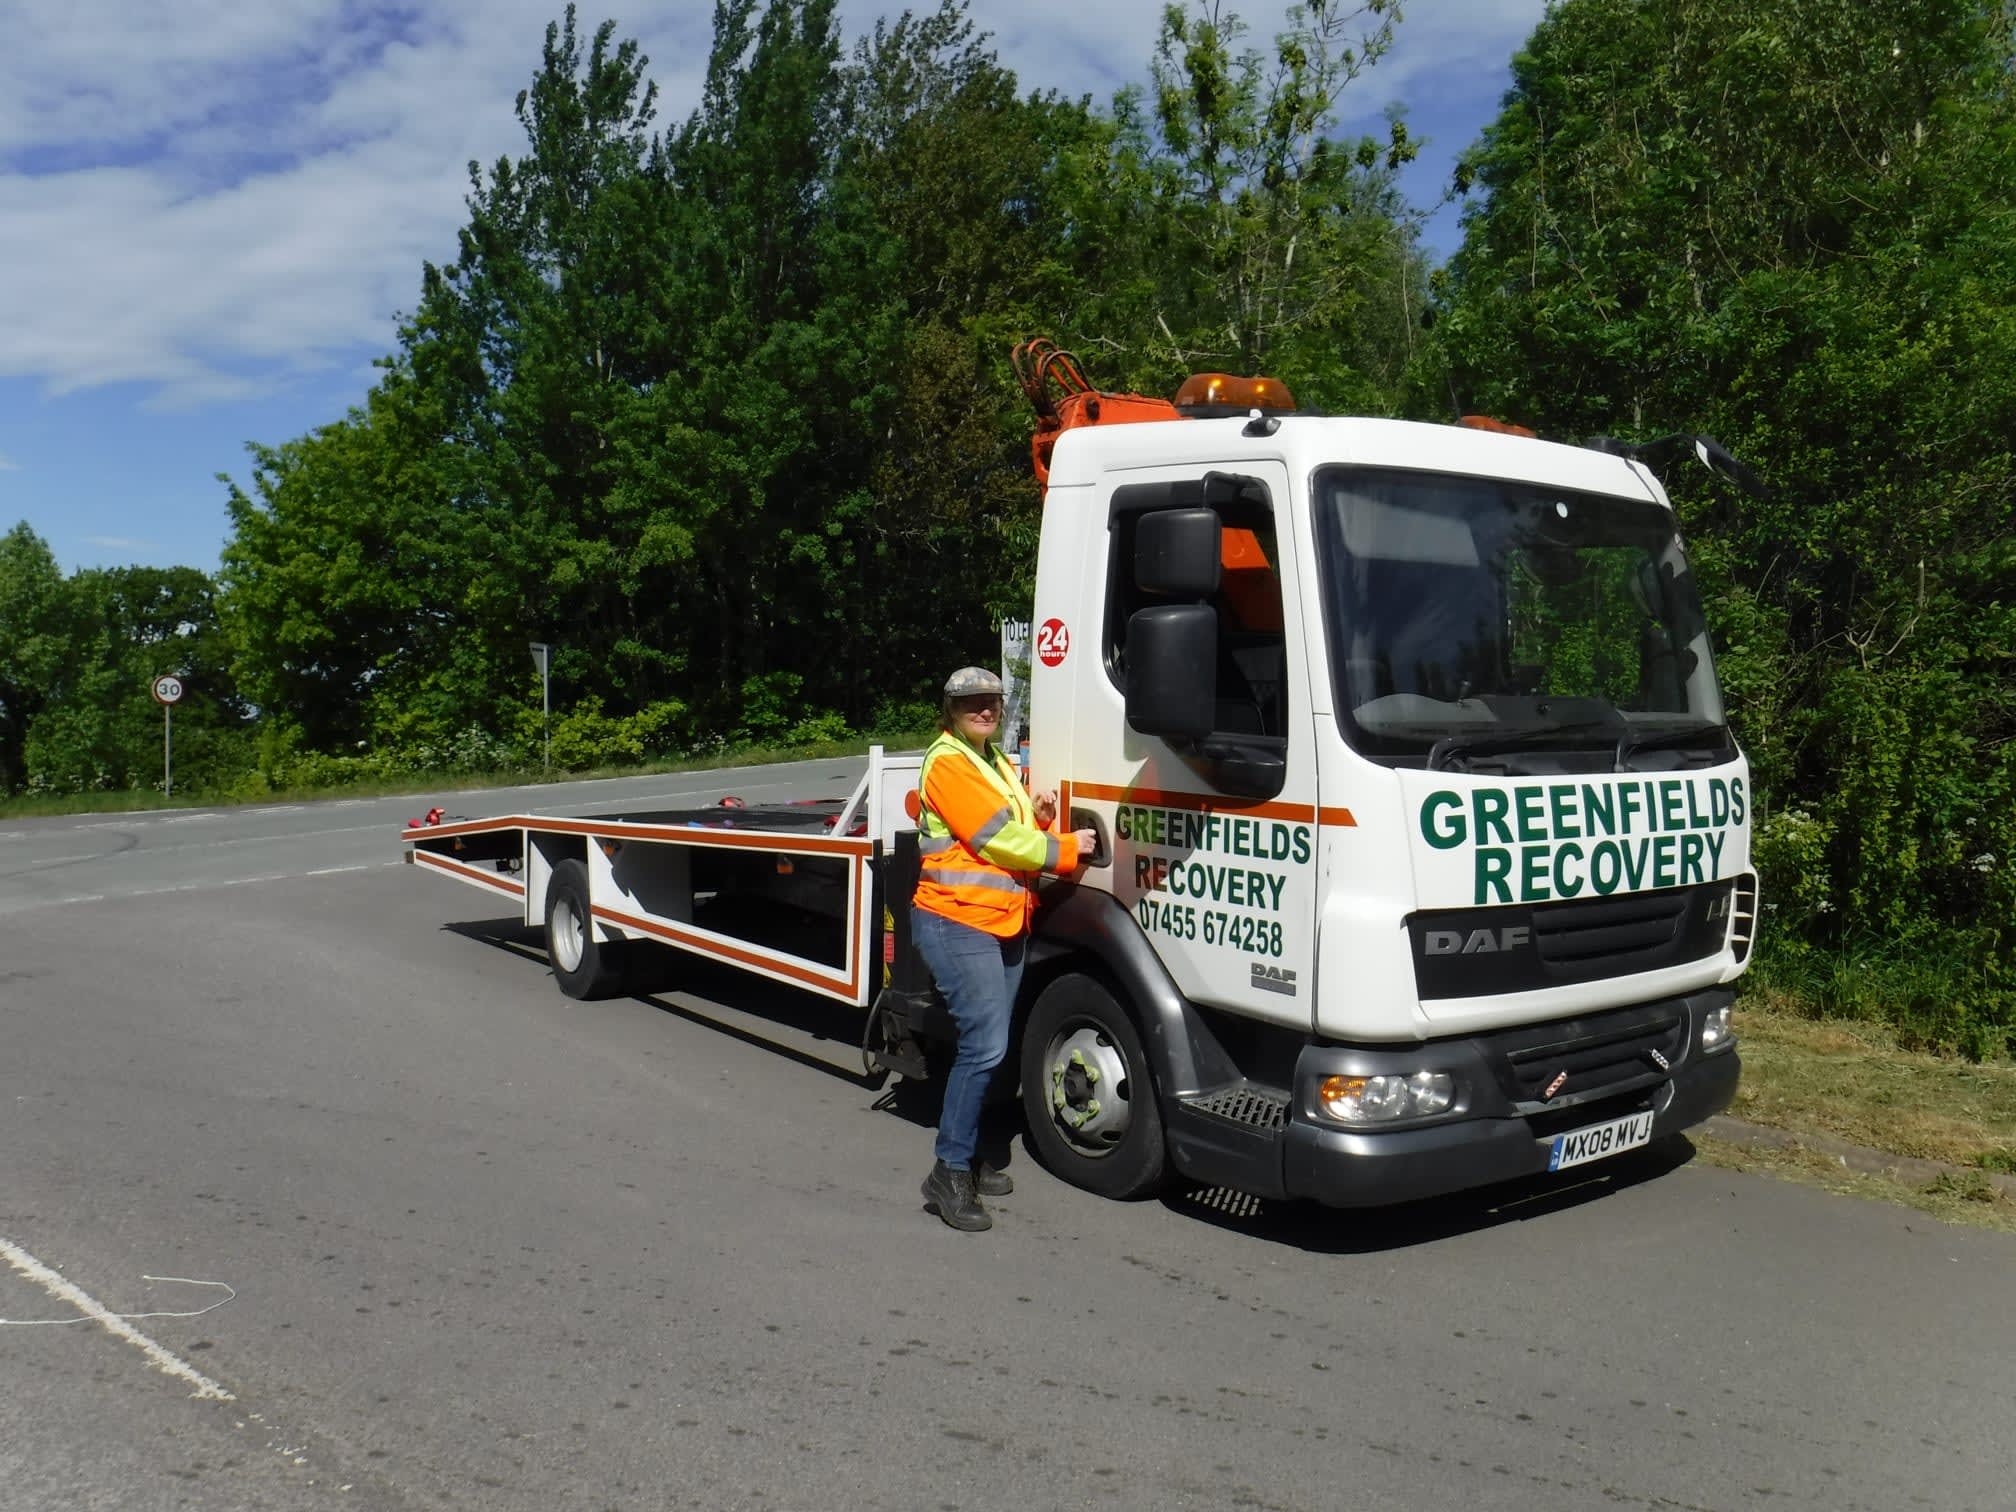 Images Greenfields 24 Hours Recovery